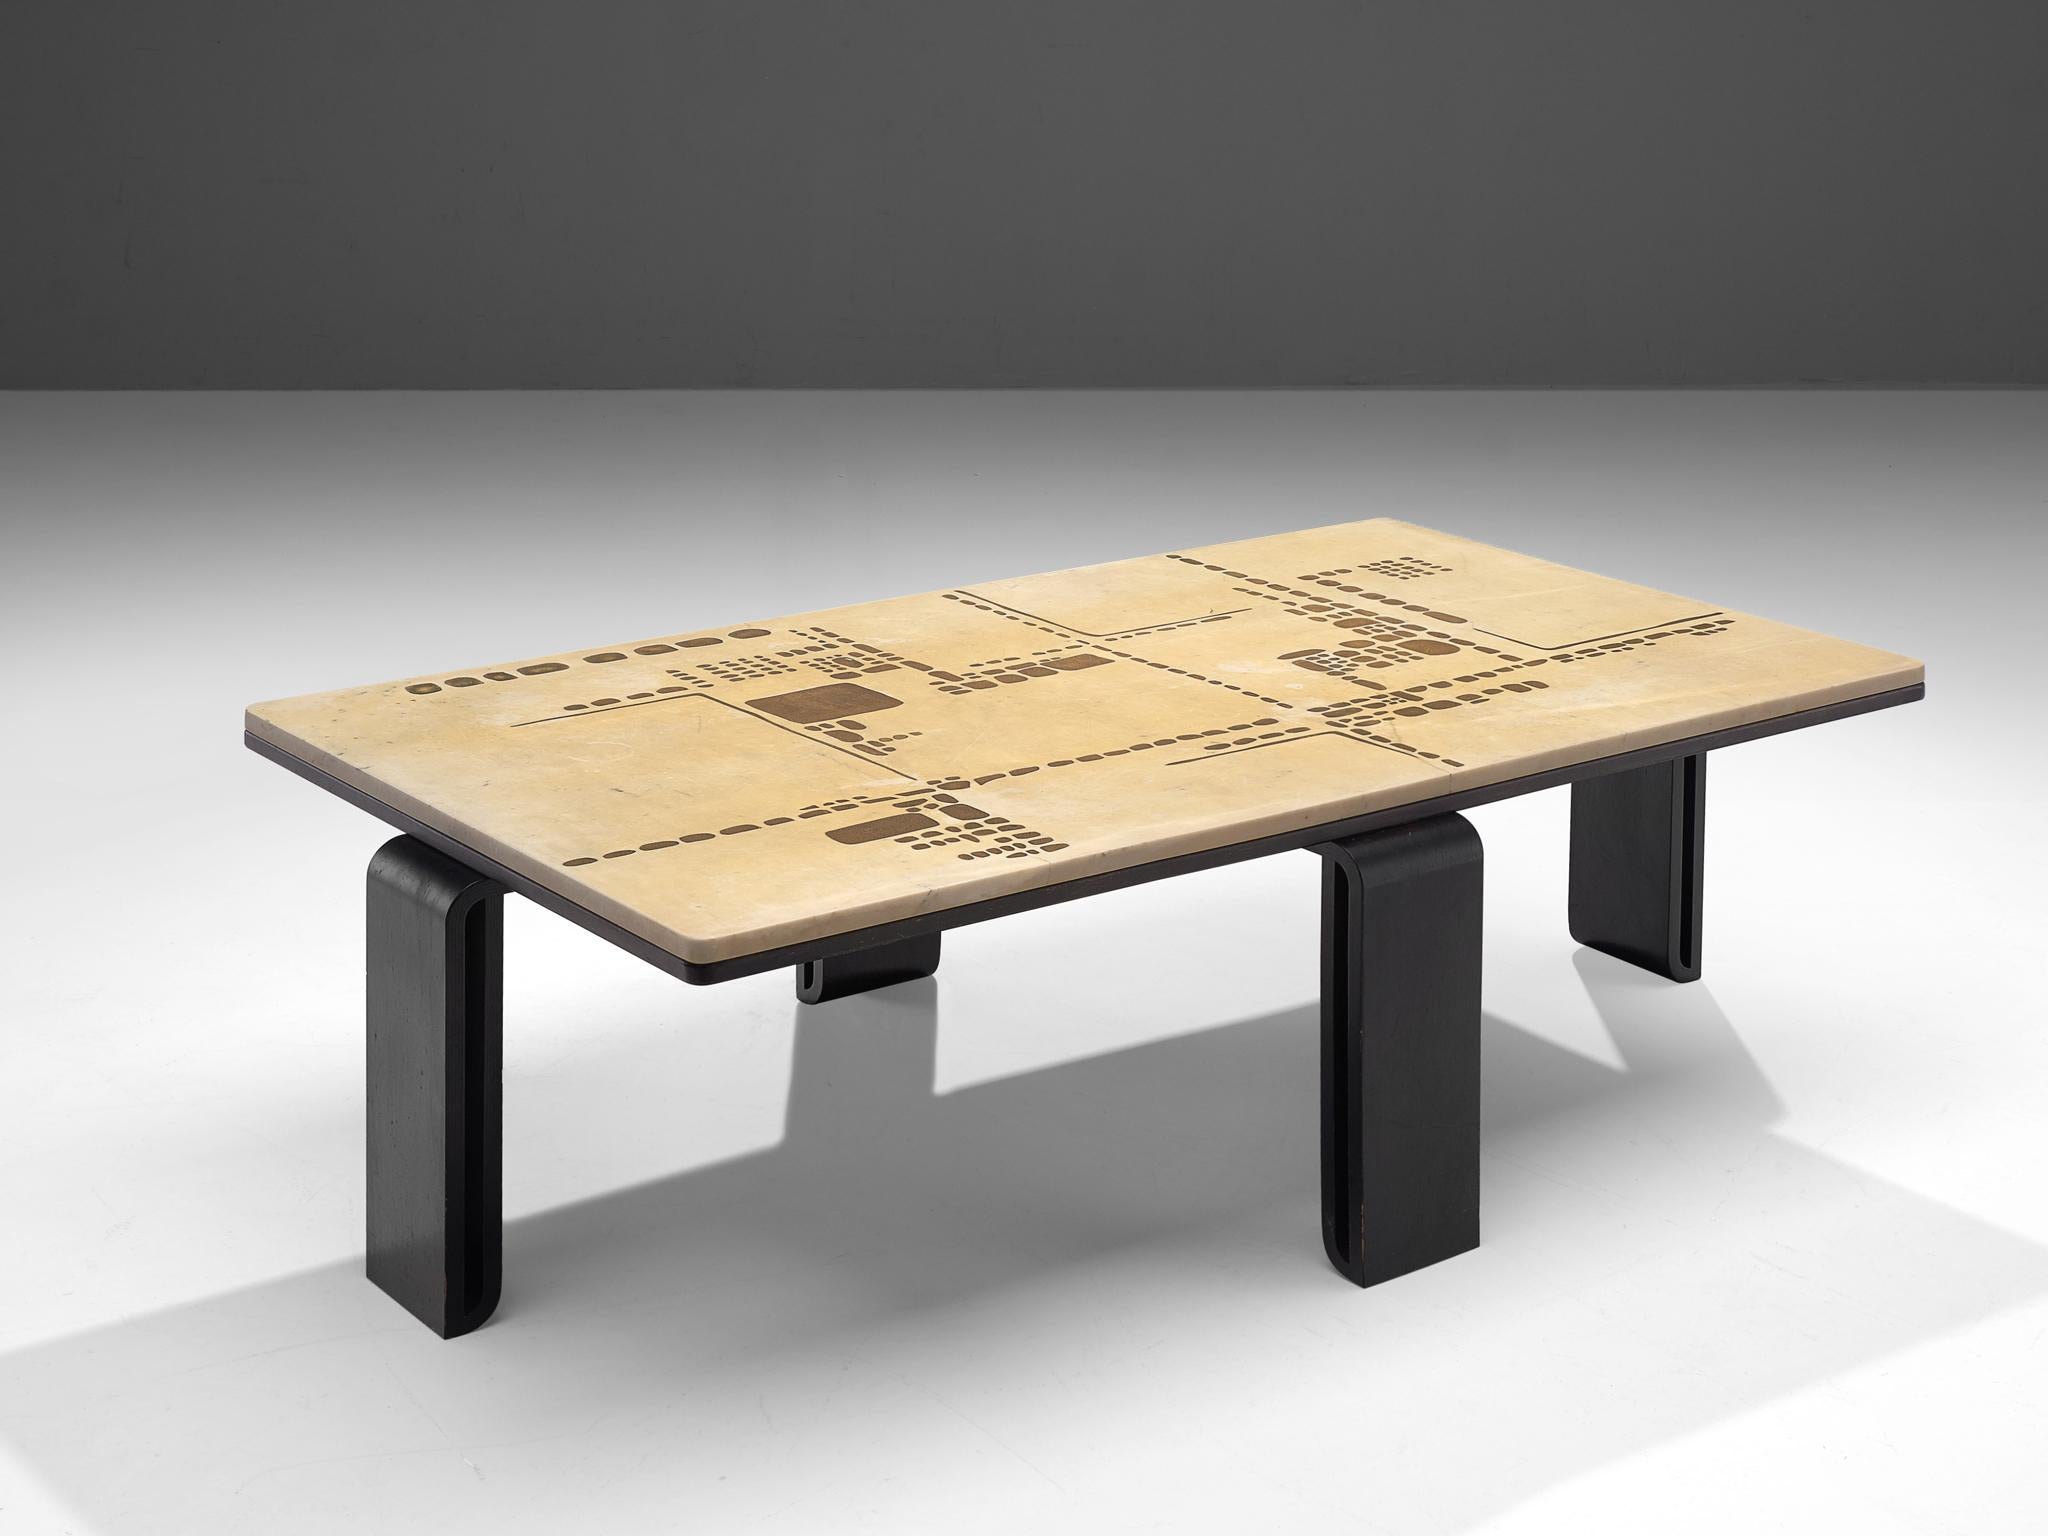 Coffee table, travertine, ebonized wood and concrete, The Netherlands, 1980s. 

Travertine table top with decorative abstract design. This arty coffee table is inlayed with concrete, creating a beautiful pattern. The frame is executed in ebonized